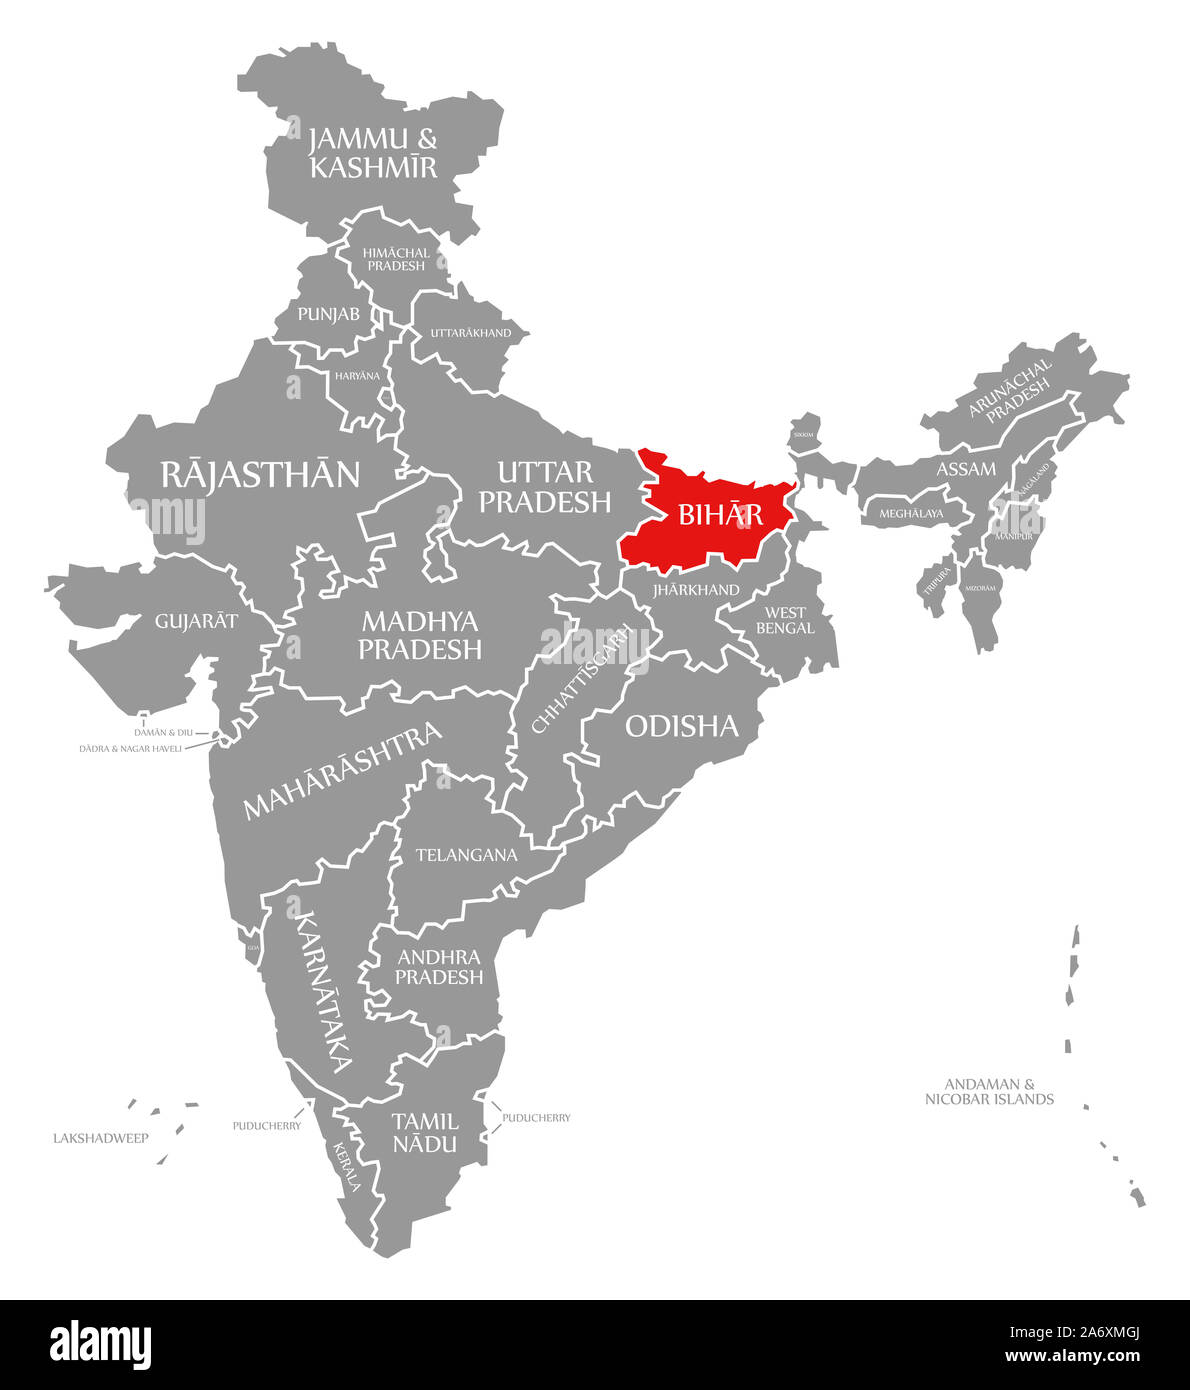 Bihar red highlighted in map of India Stock Photo